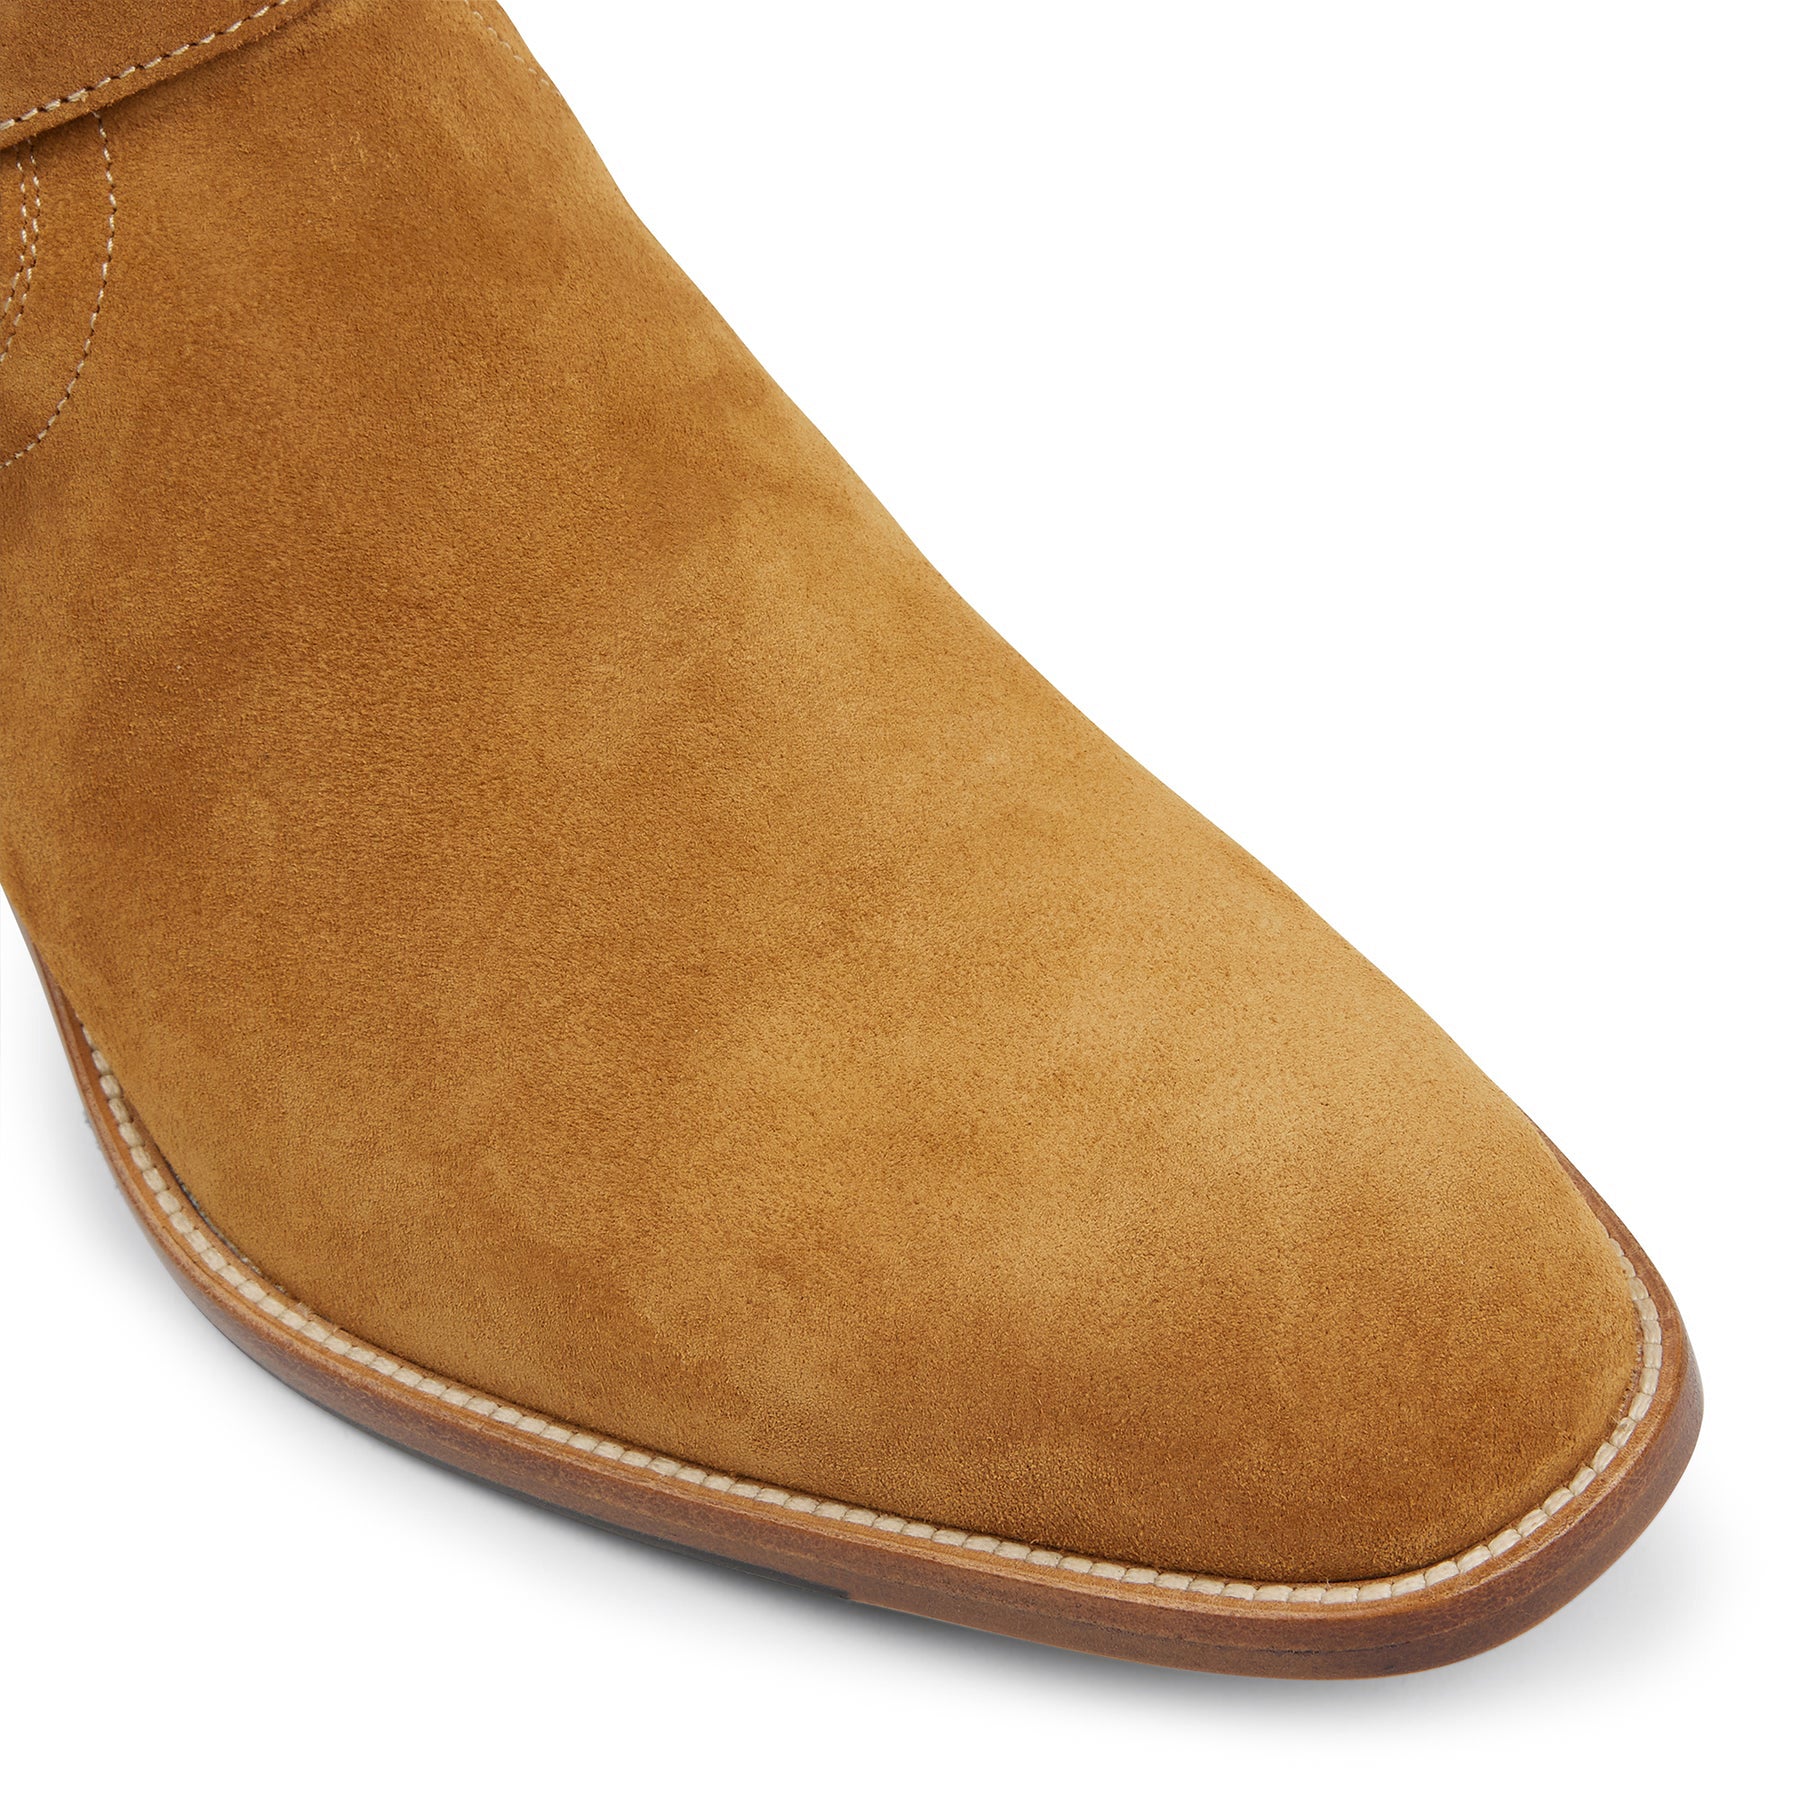 Harness Zip Boot - Camel Suede Leather